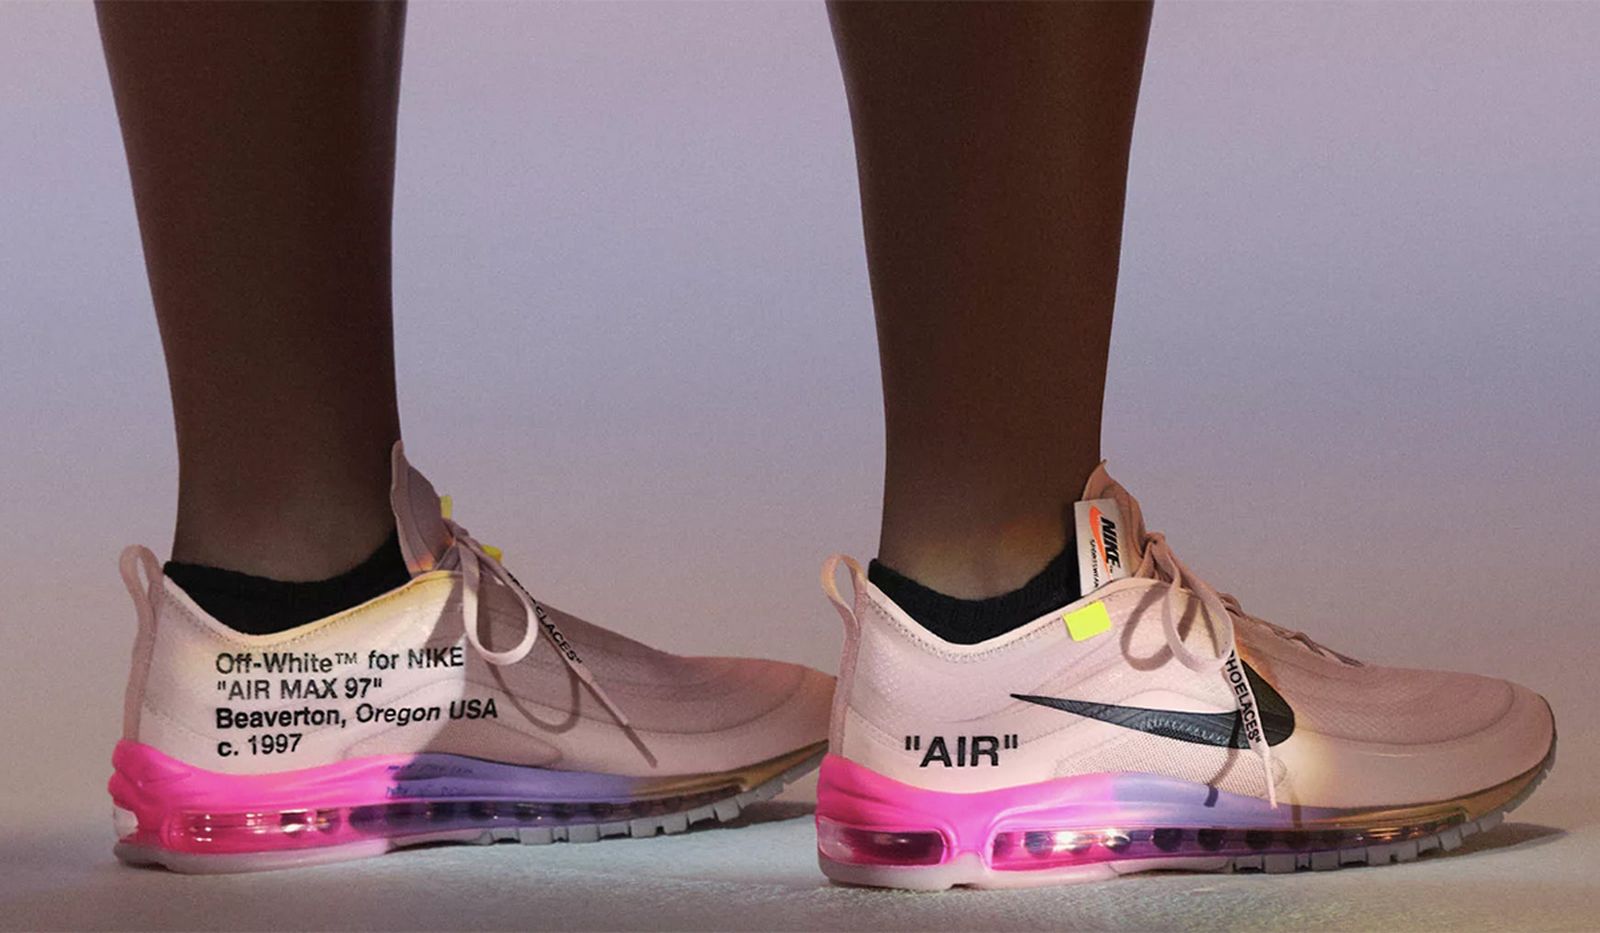 OFF-WHITE x pink and white nike air max Nike Air Max 97 “Queen”: Official Release Info